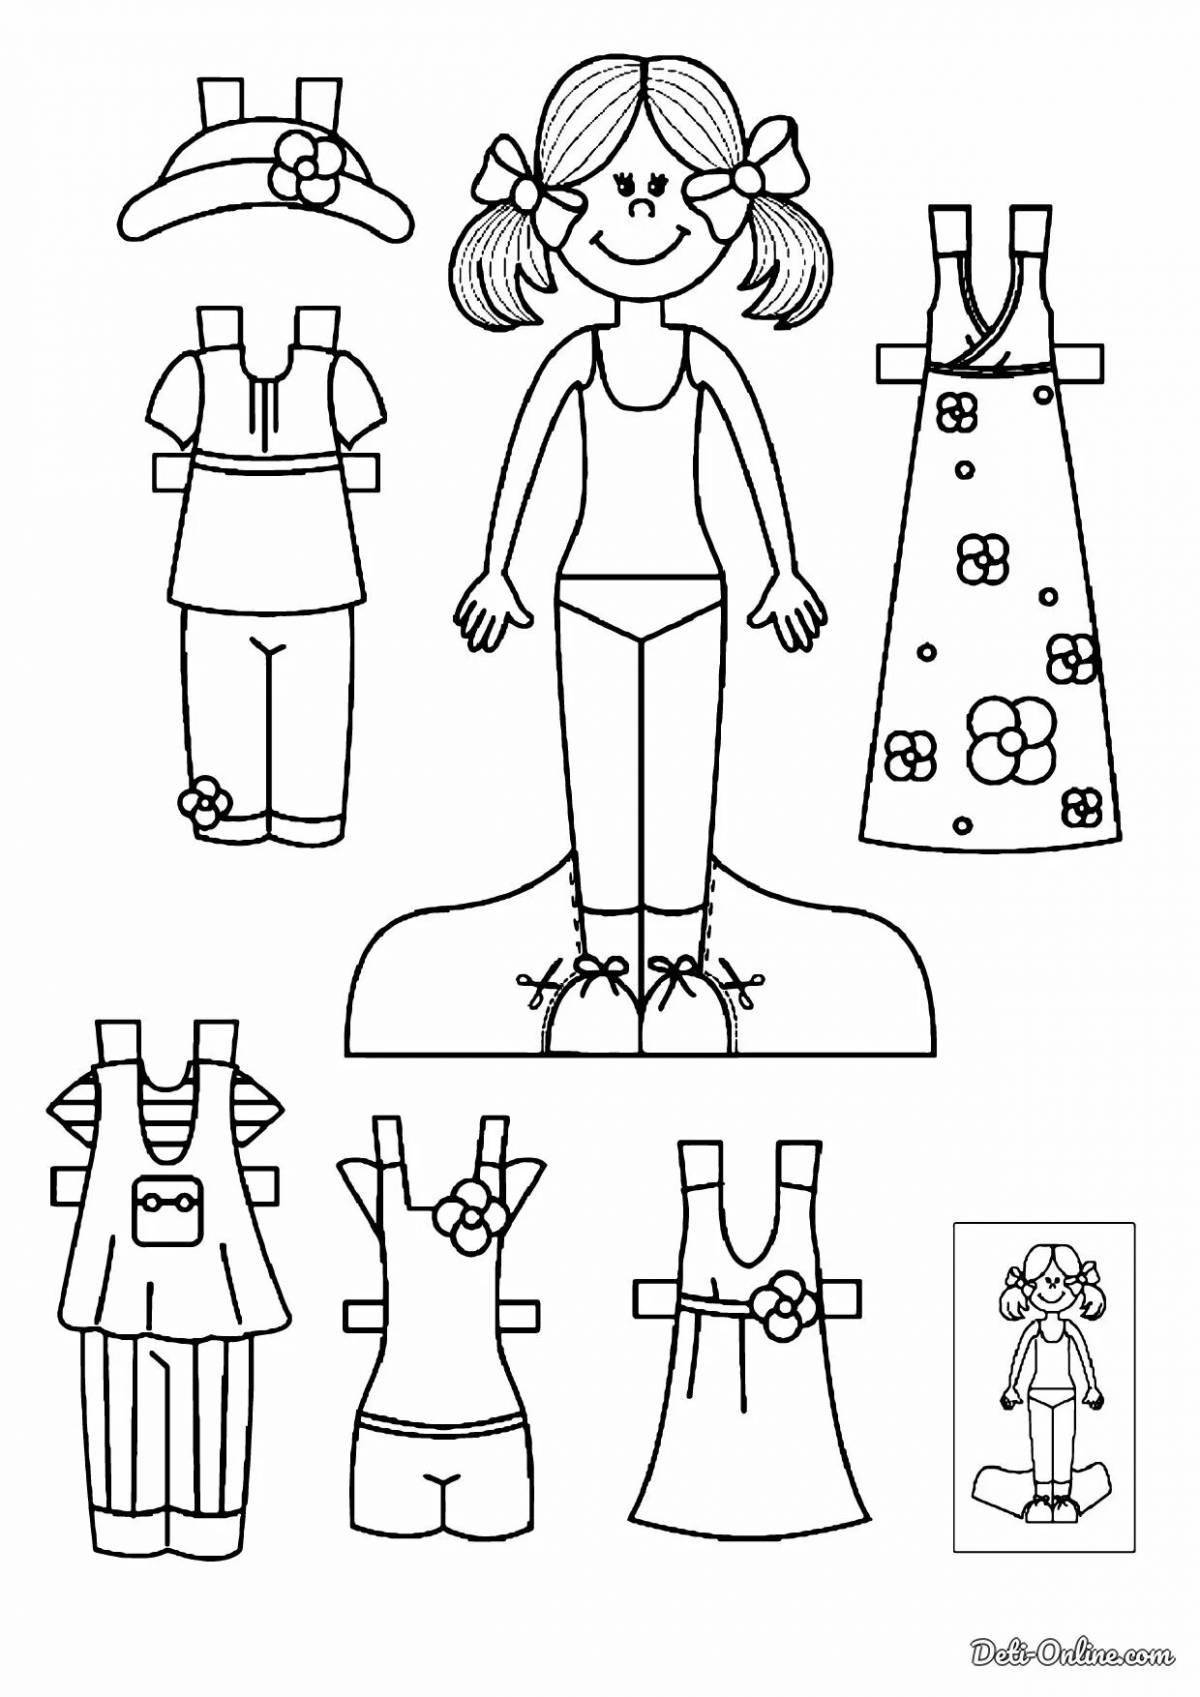 Adorable paper dolls with clothes